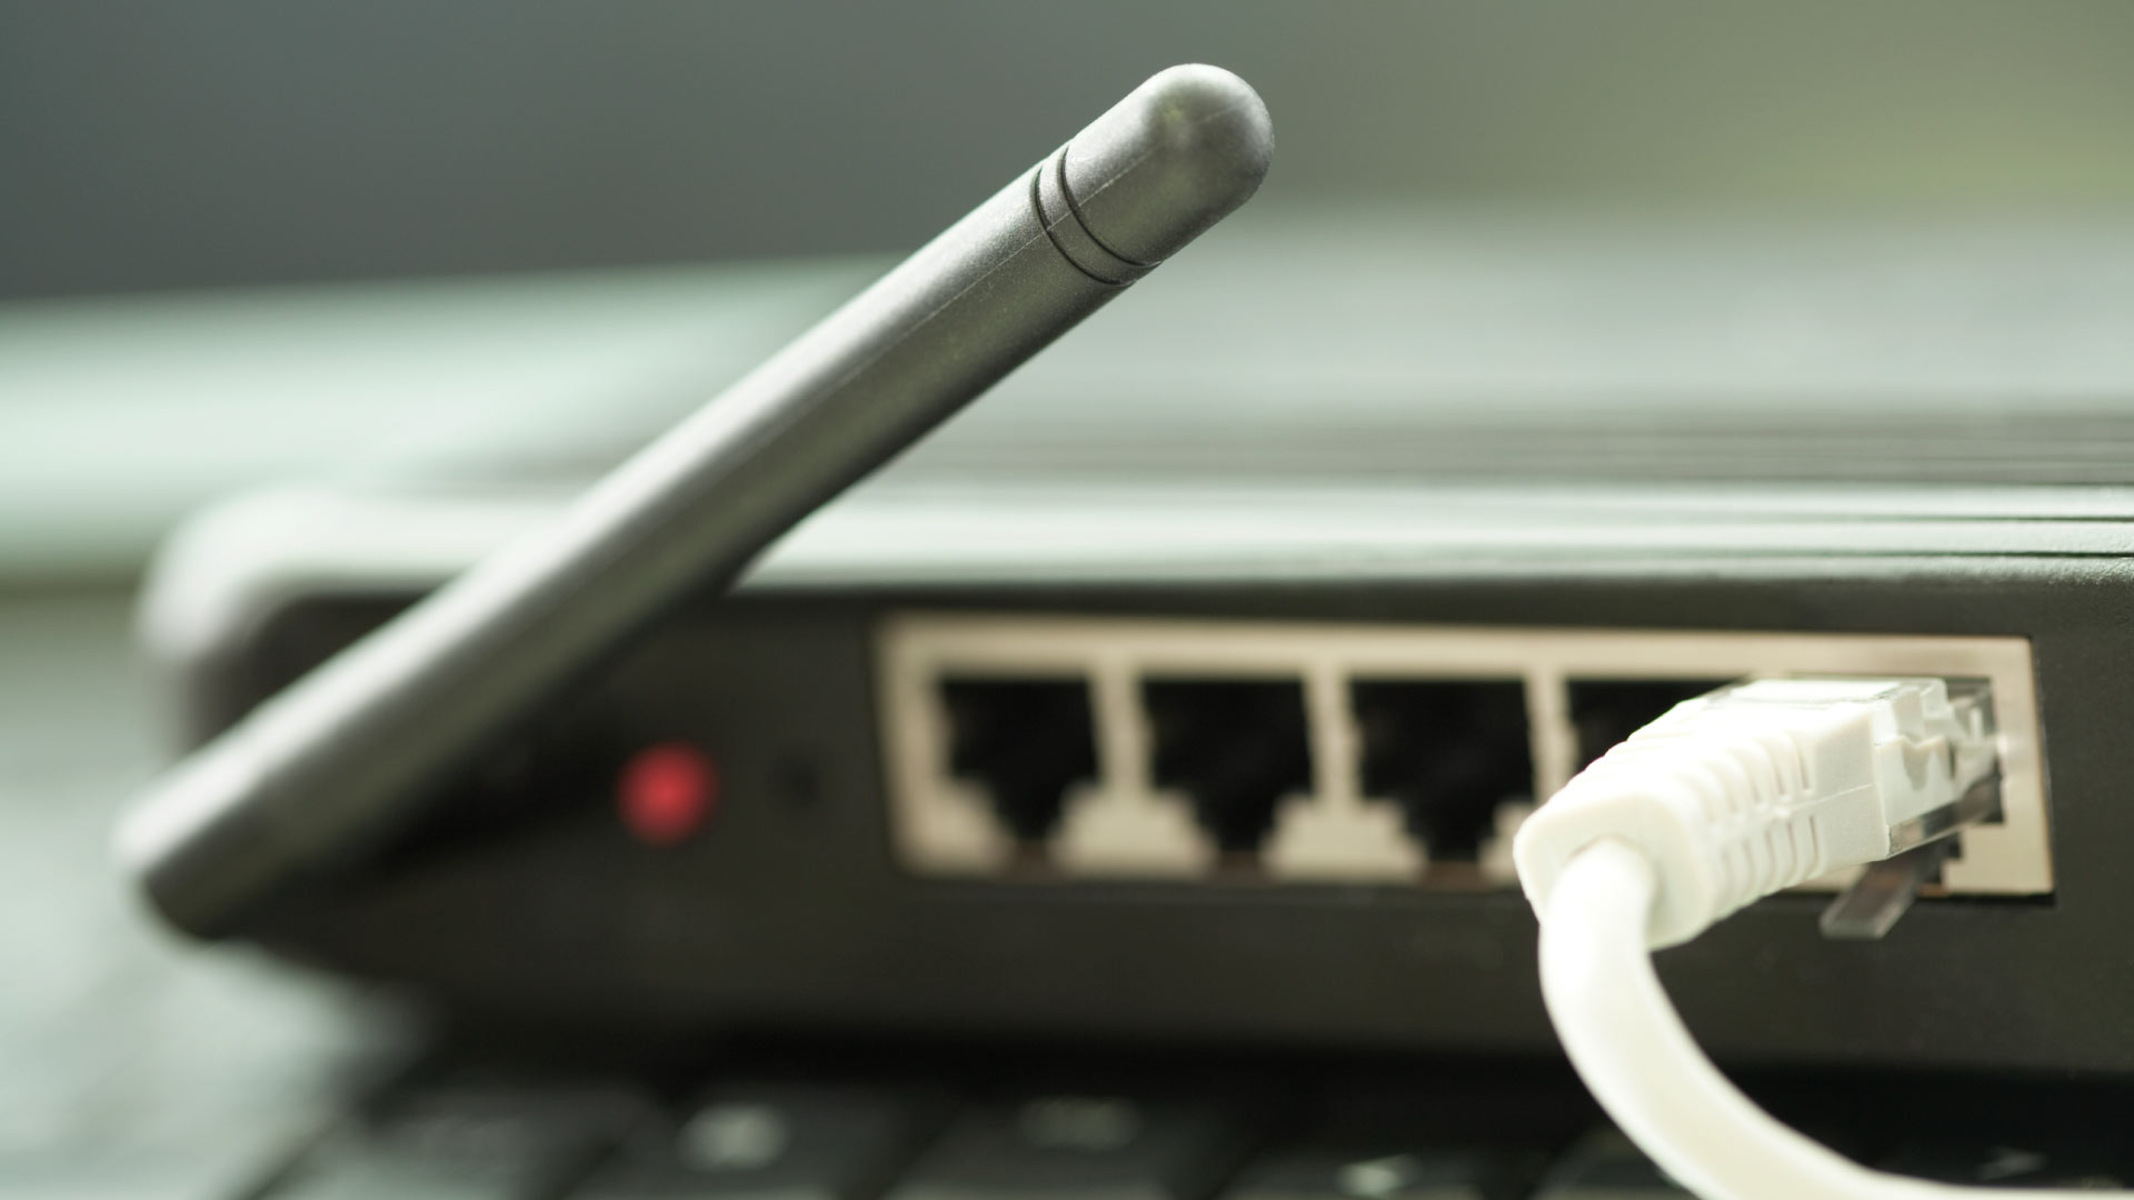 What Is The Best Security Option For A Wireless Router?